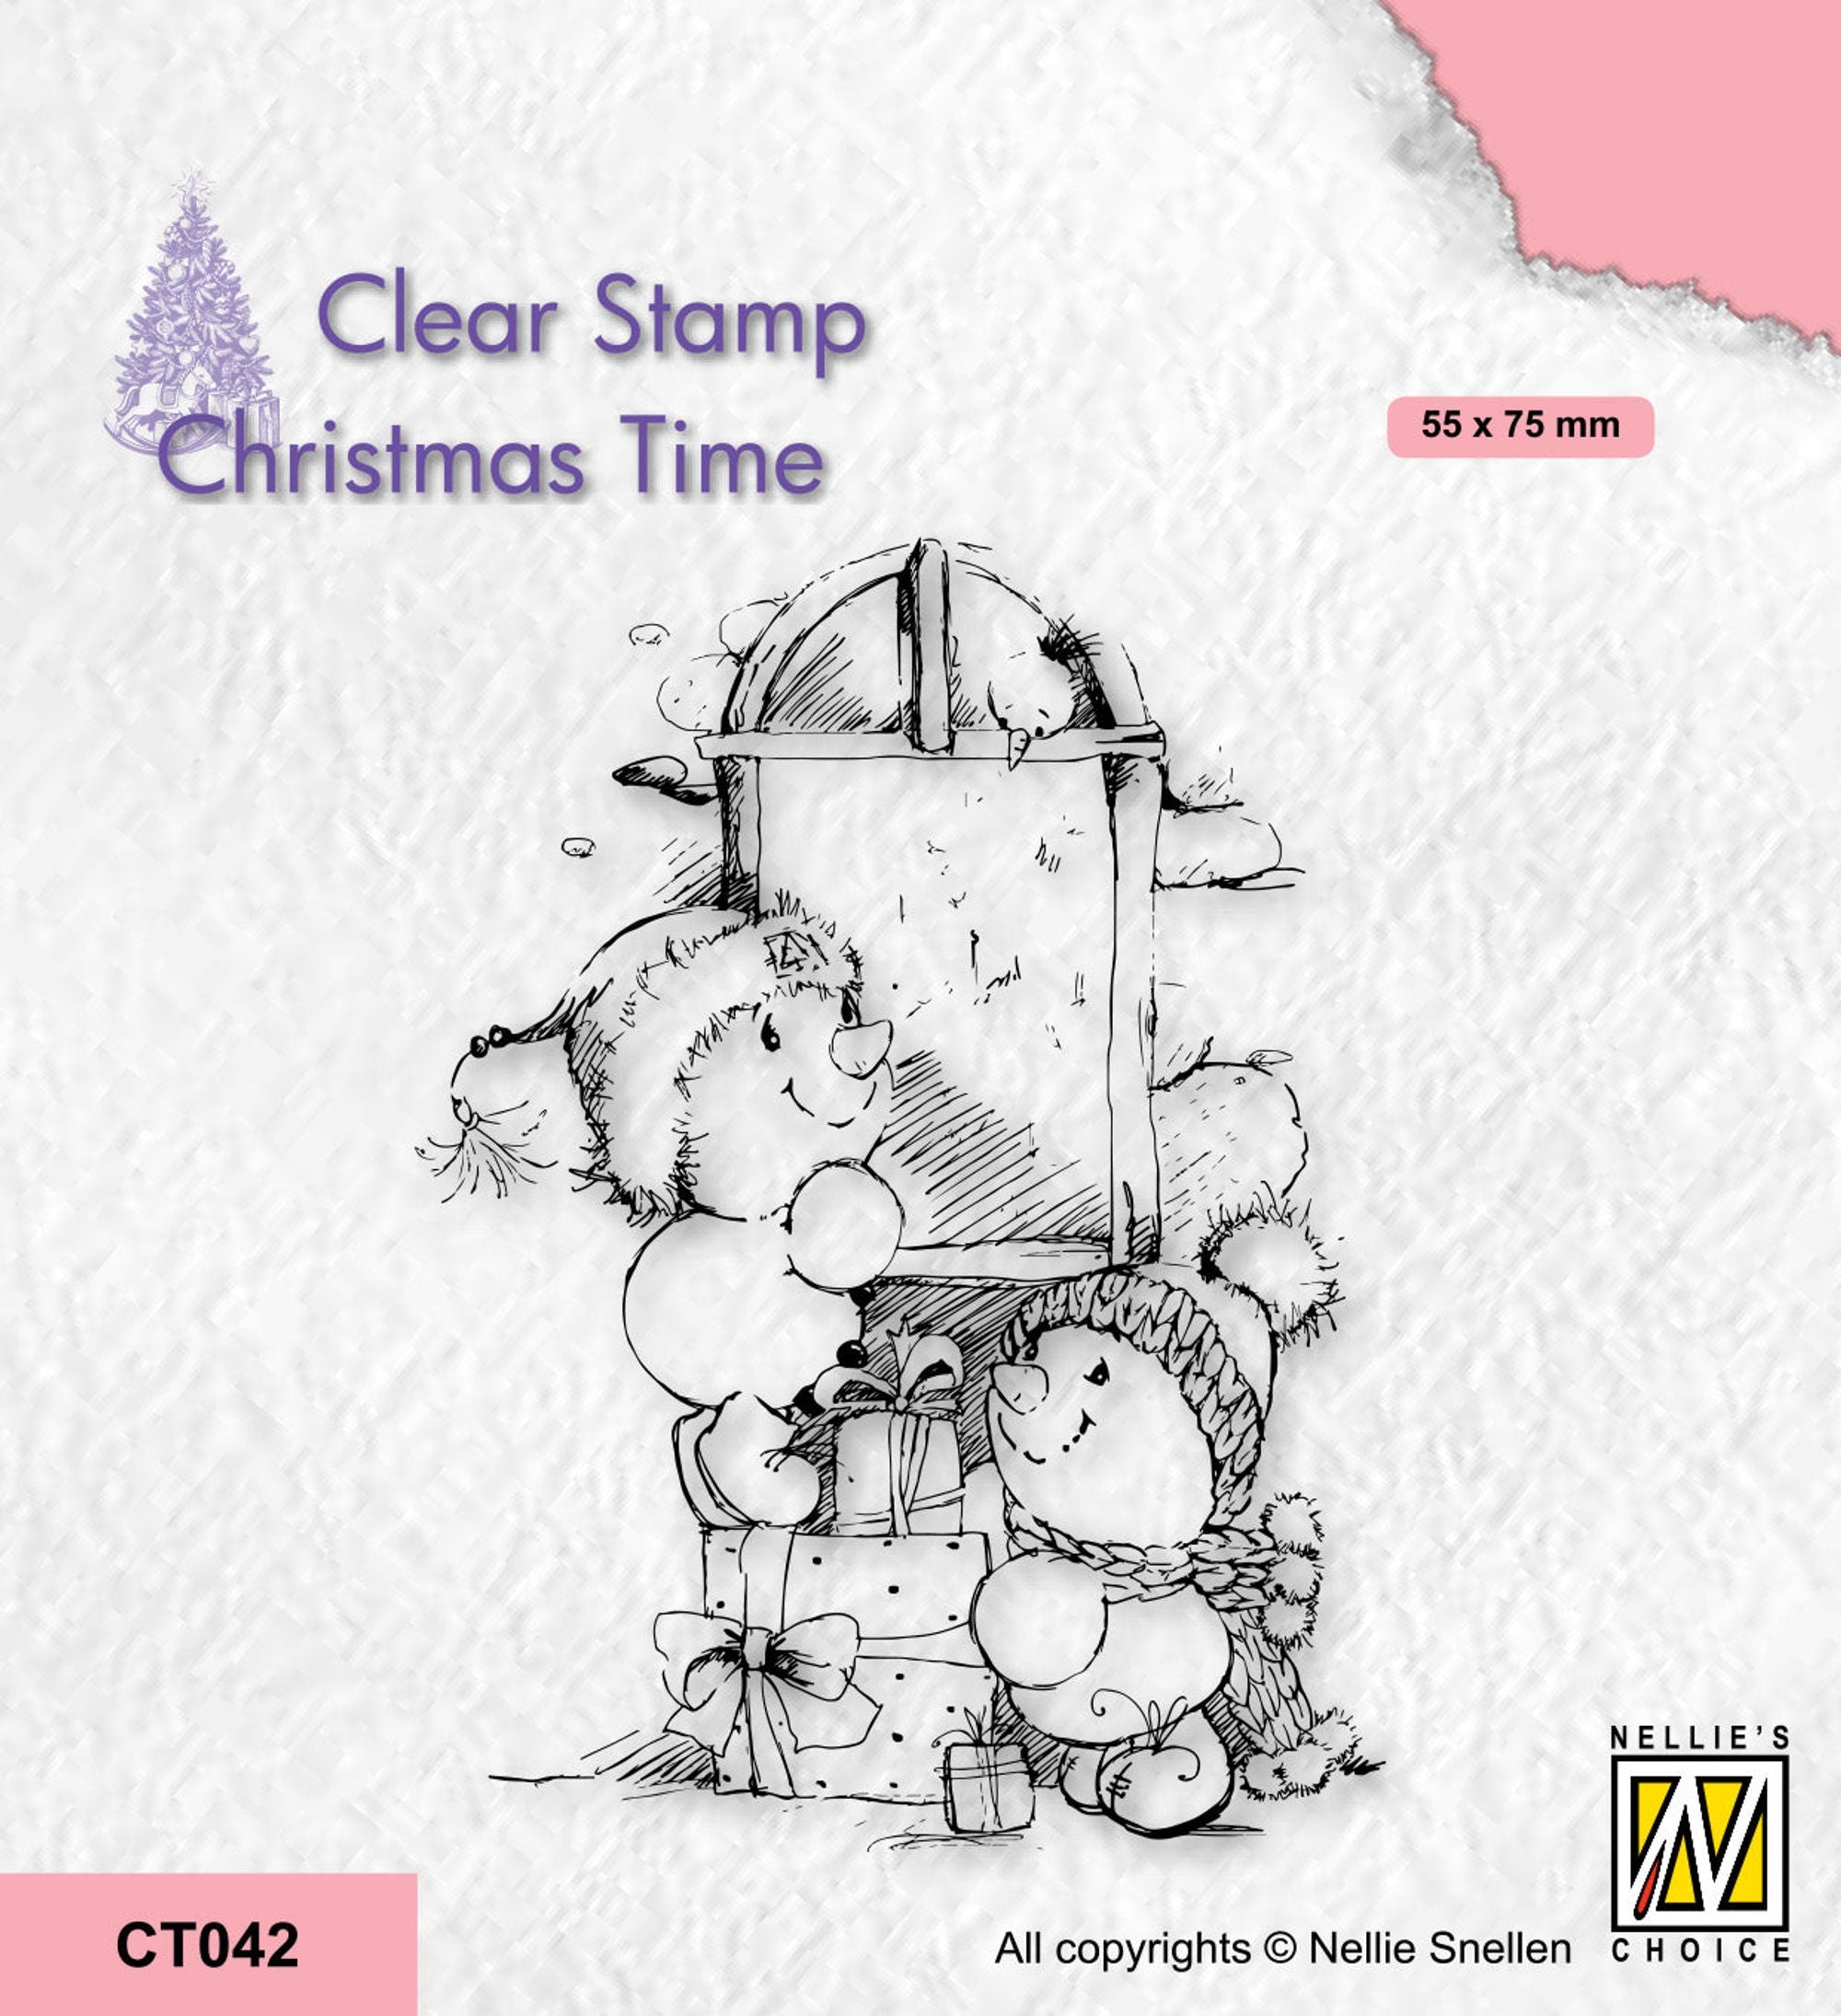 Nellie's Choice Clear Stamp Christmas Time - Present Delivery